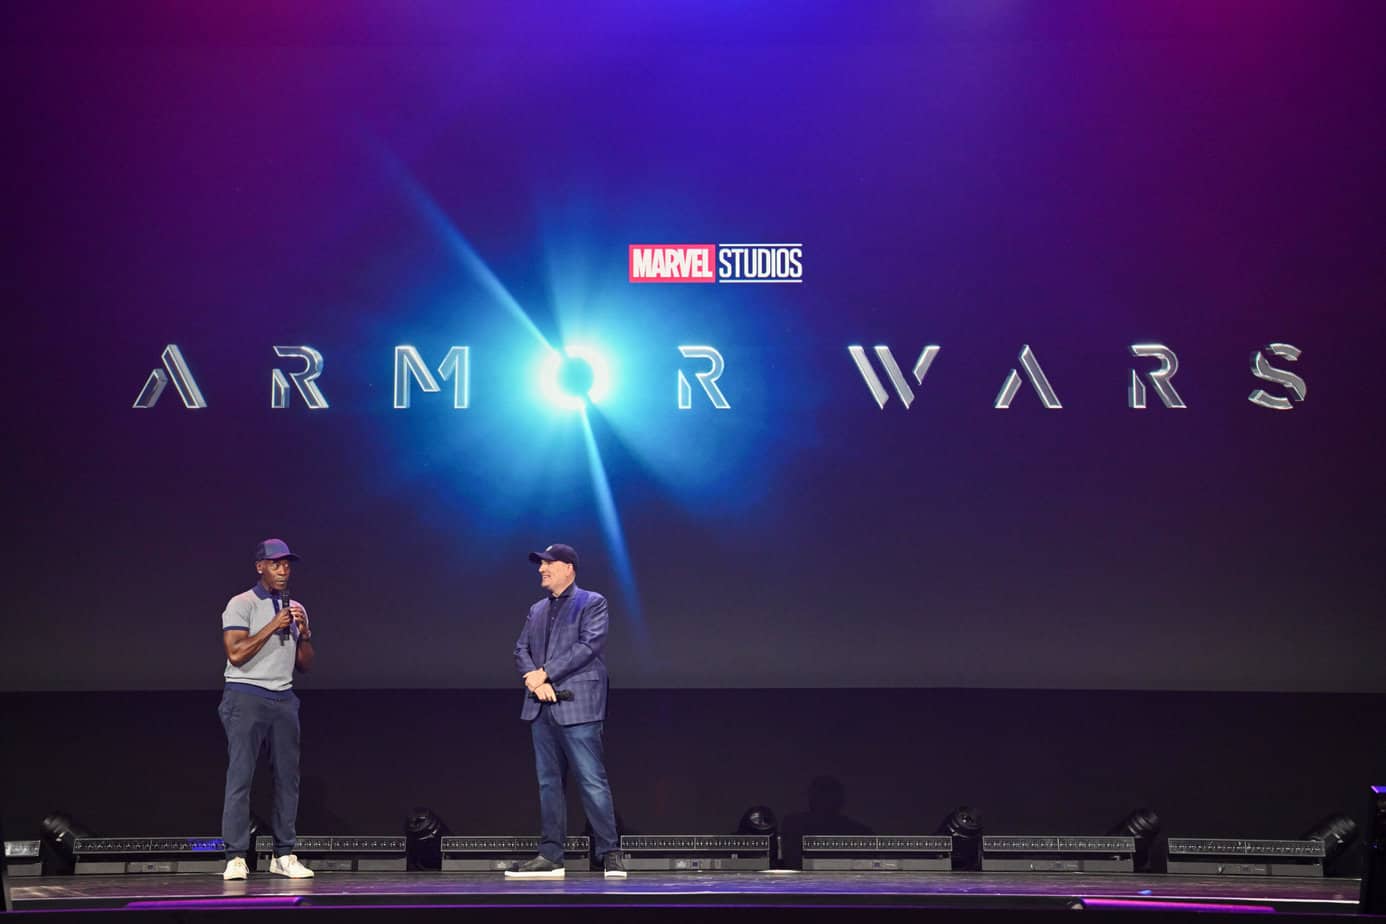 Don Cheadle and Kevin Feige on stage during the Marvel Studios panel at D23 Expo 2022 with the Armor Wars logo behind them.